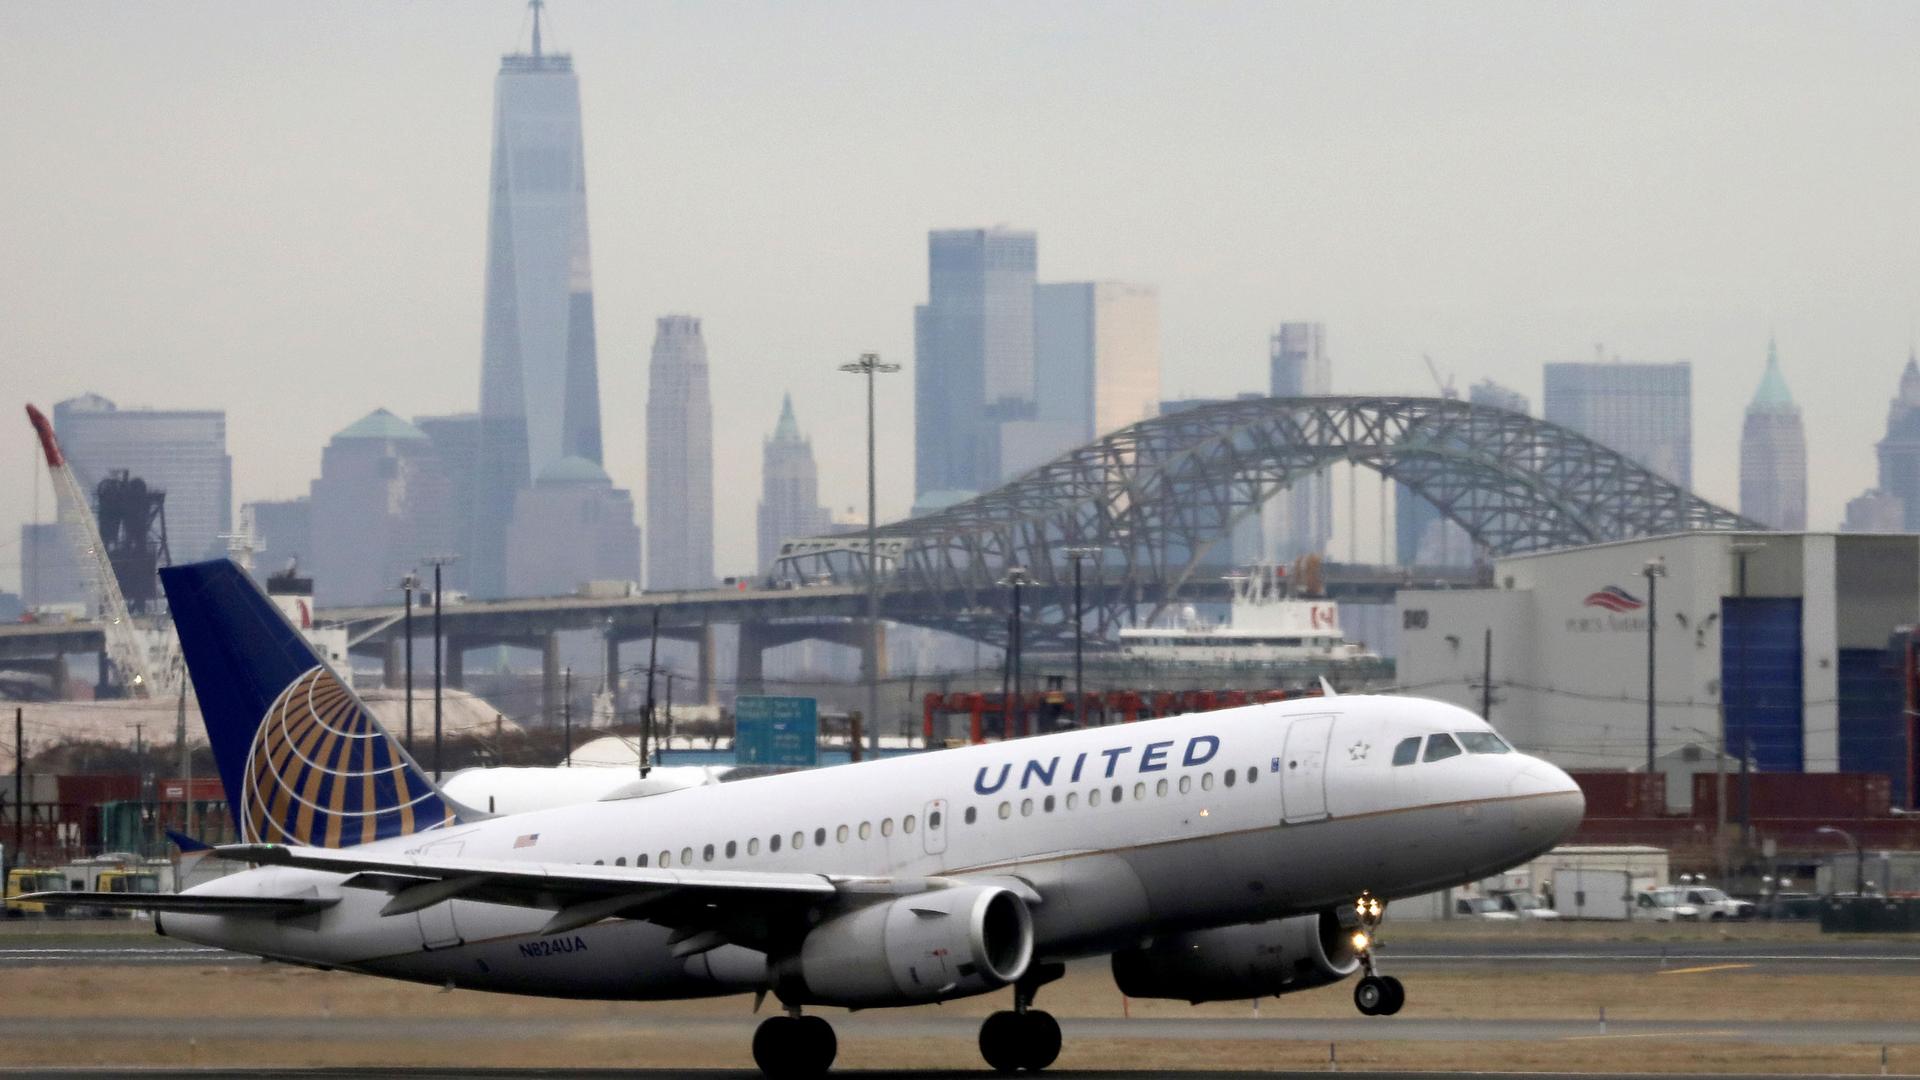 A United plane takes off